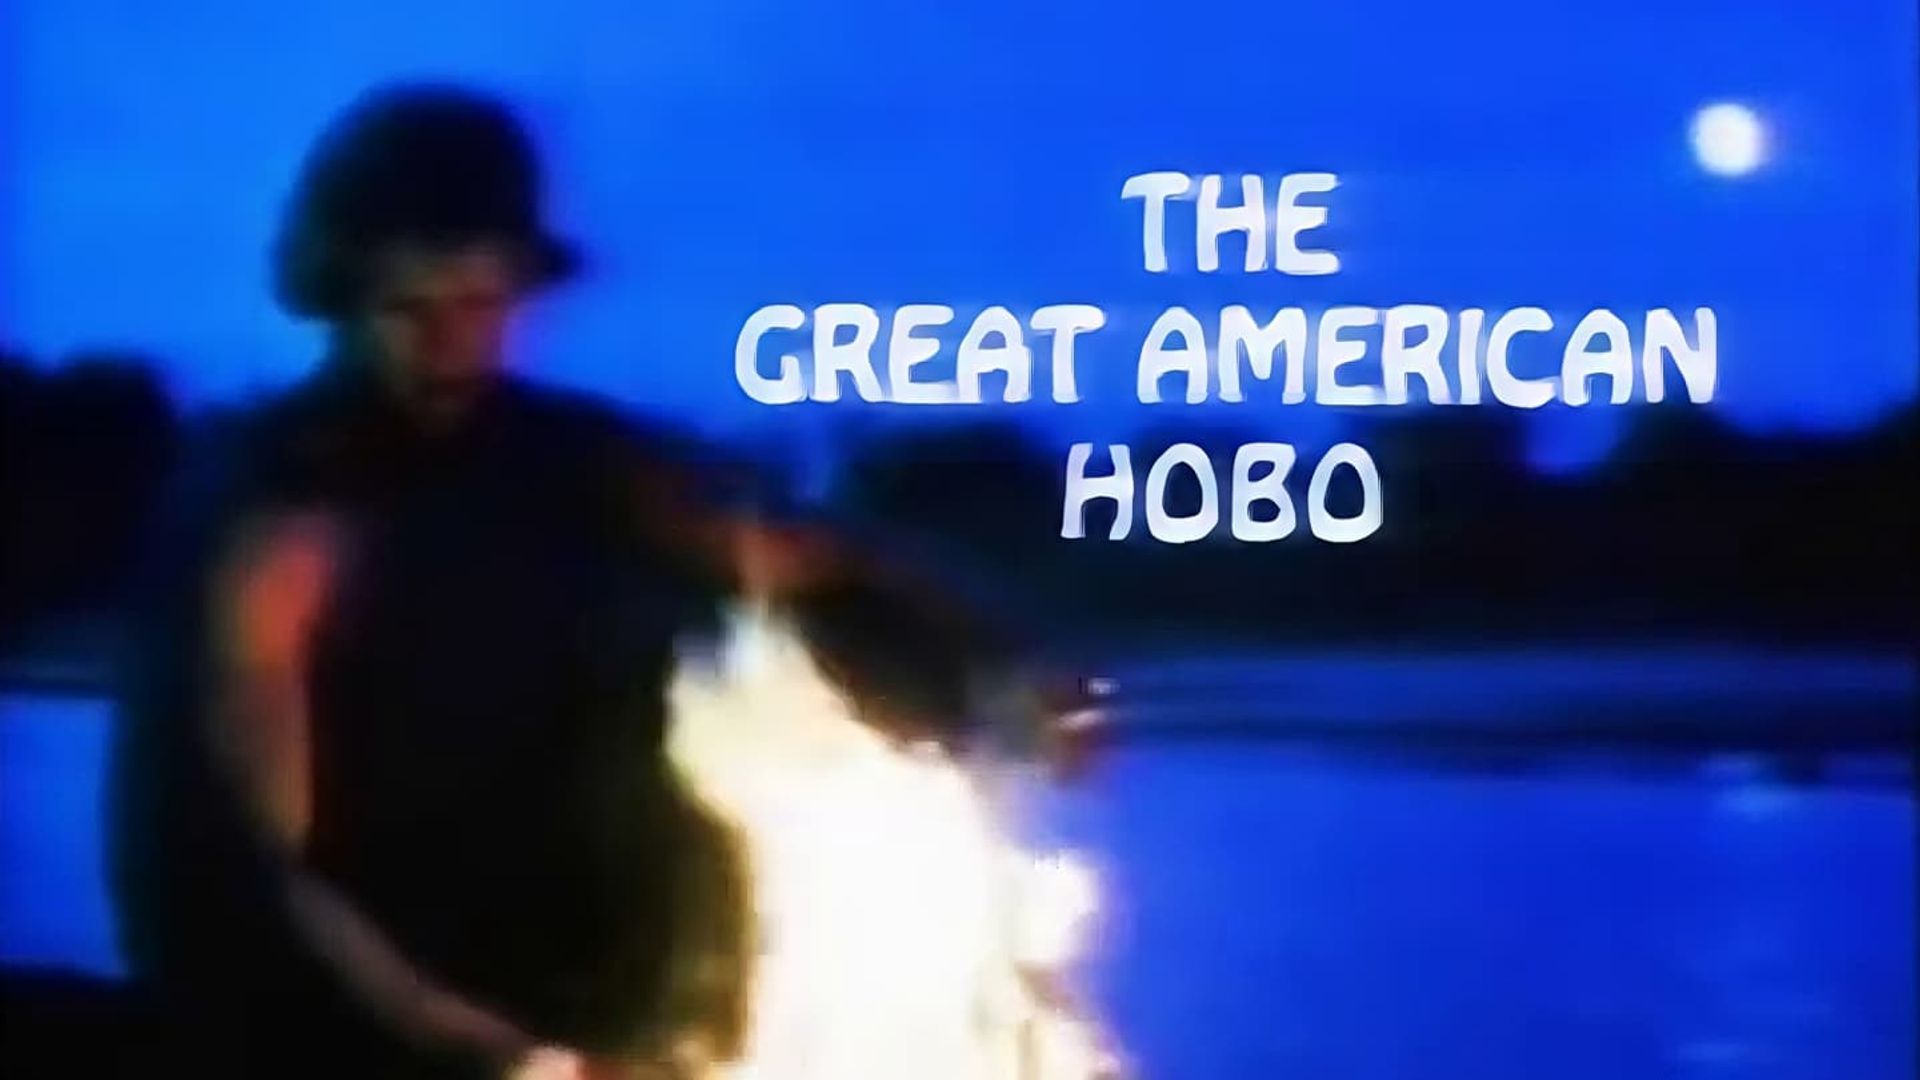 The Great American Hobo background